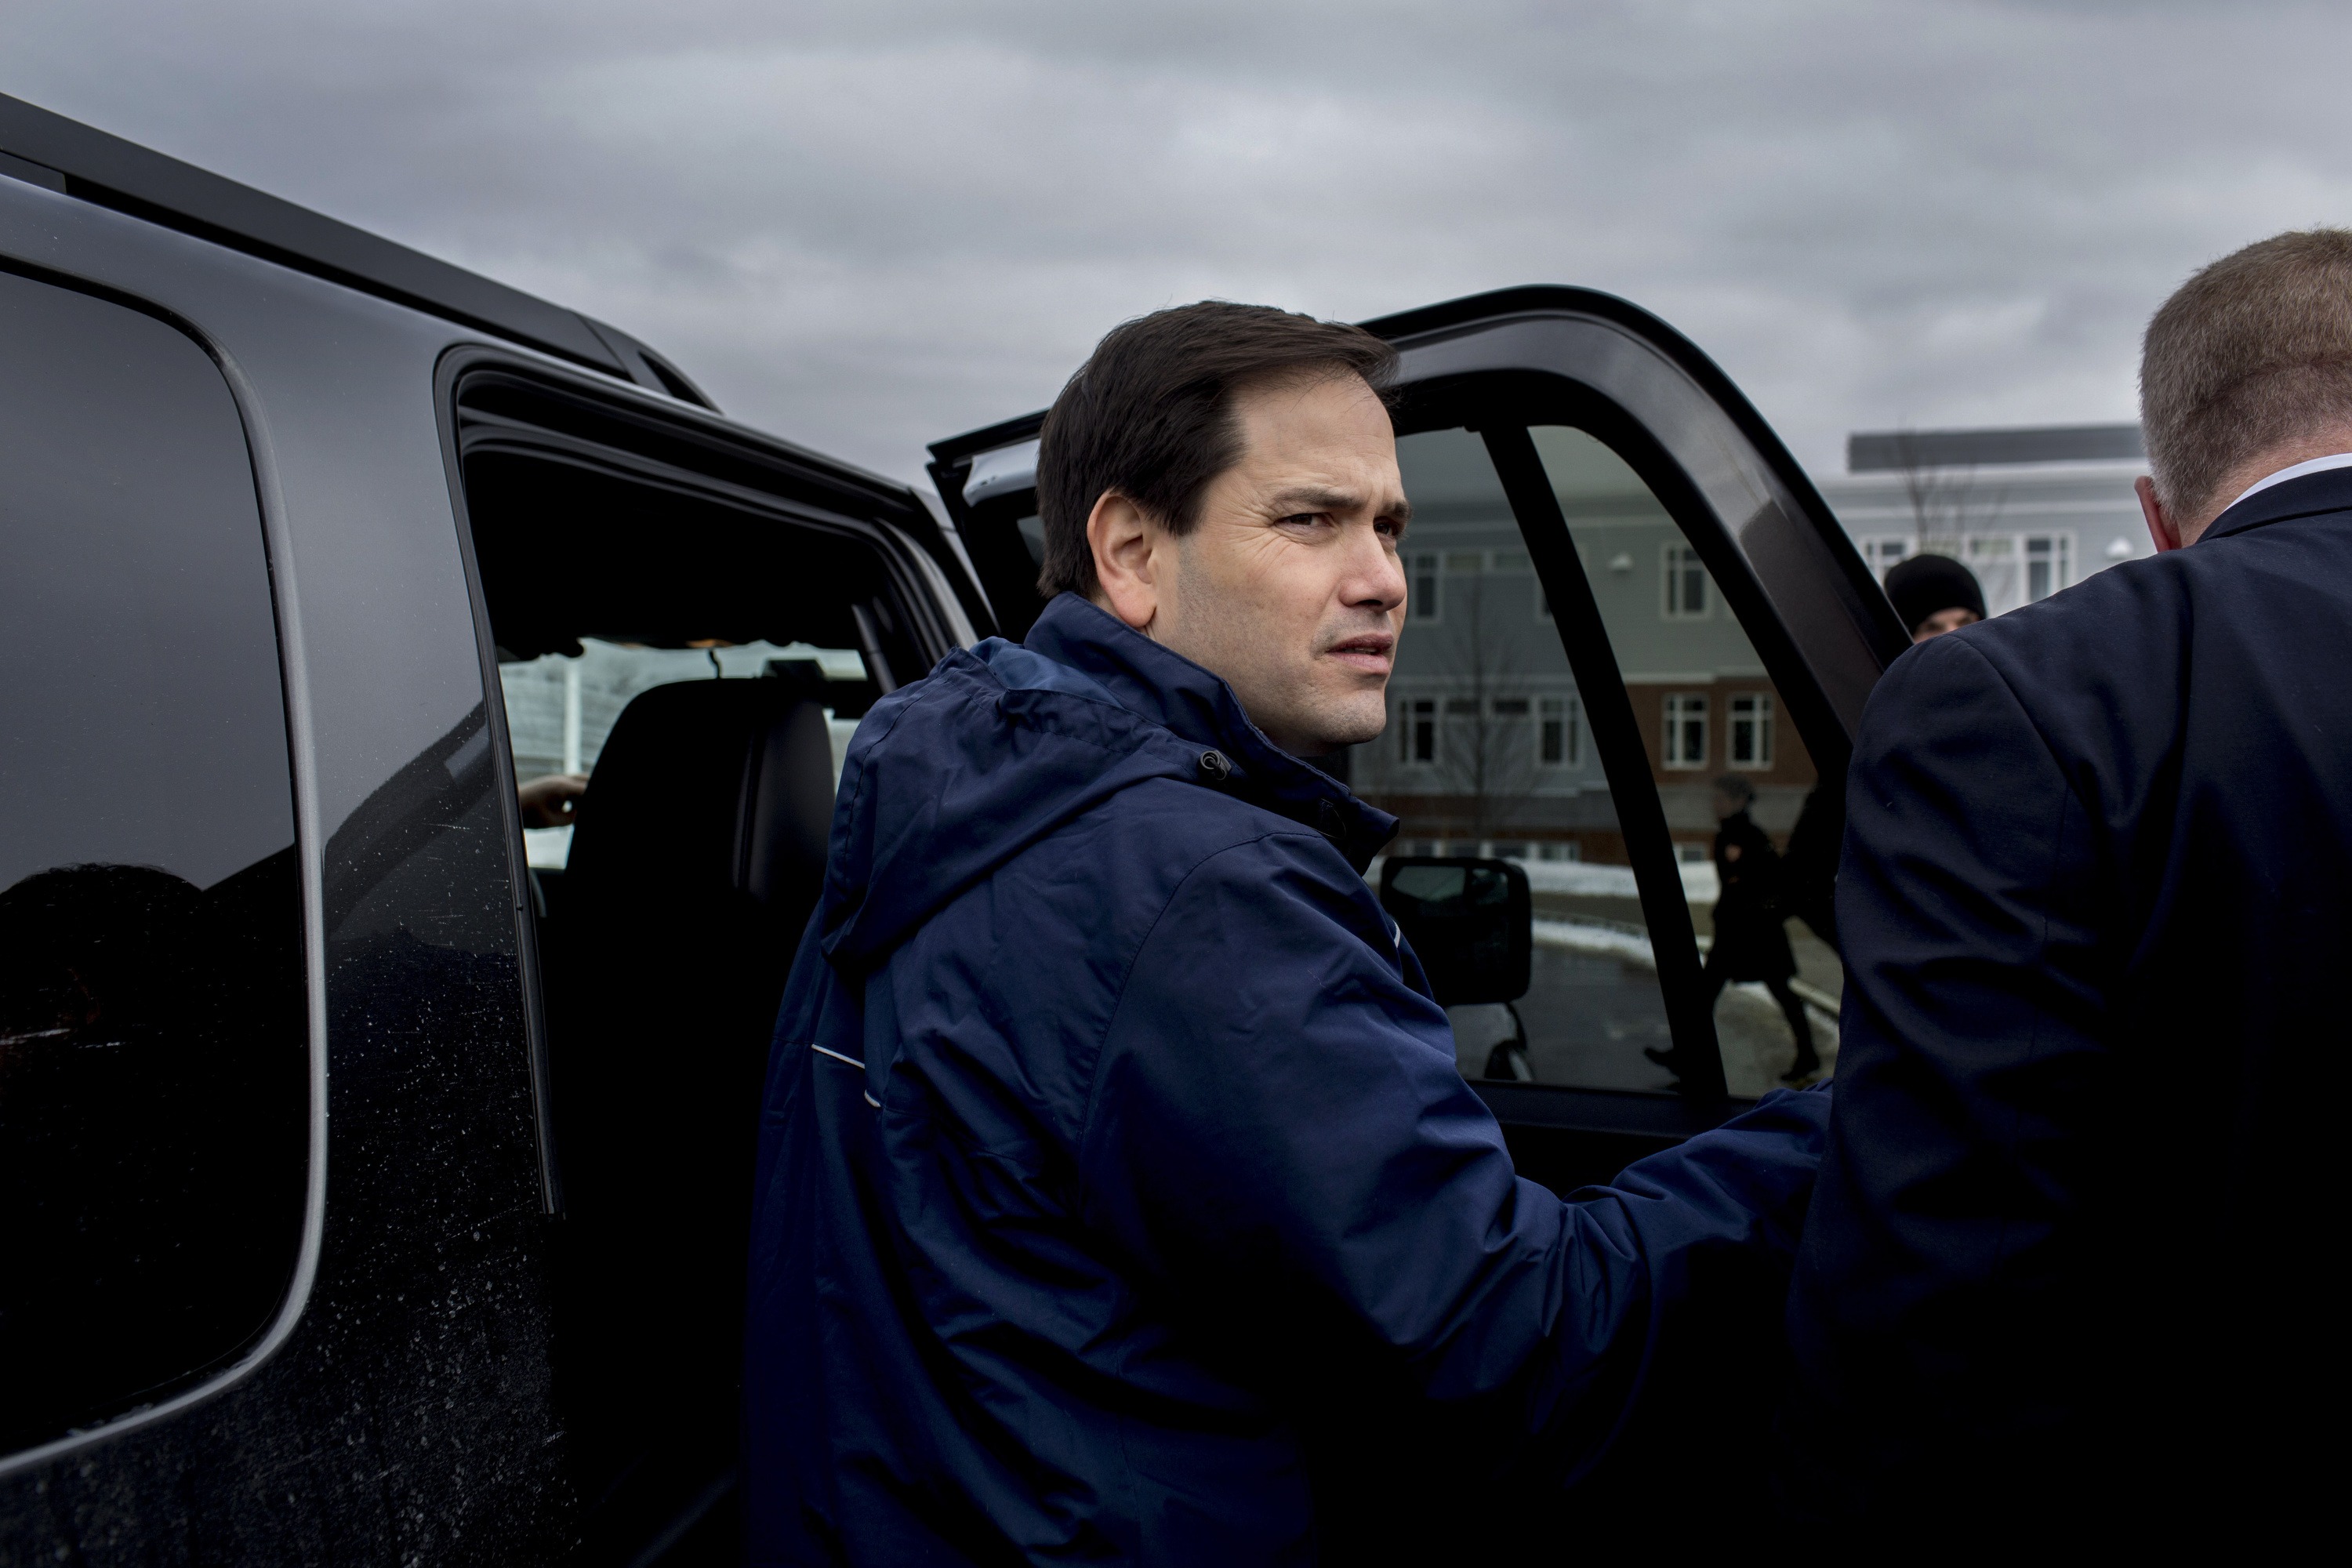 Republican presidential candidate Florida Sen. Marco Rubio greets supporters outside a polling a polling station located at Windham High School in Windham N.H., Feb. 9, 2016. (Natalie Keyssar for TIME)